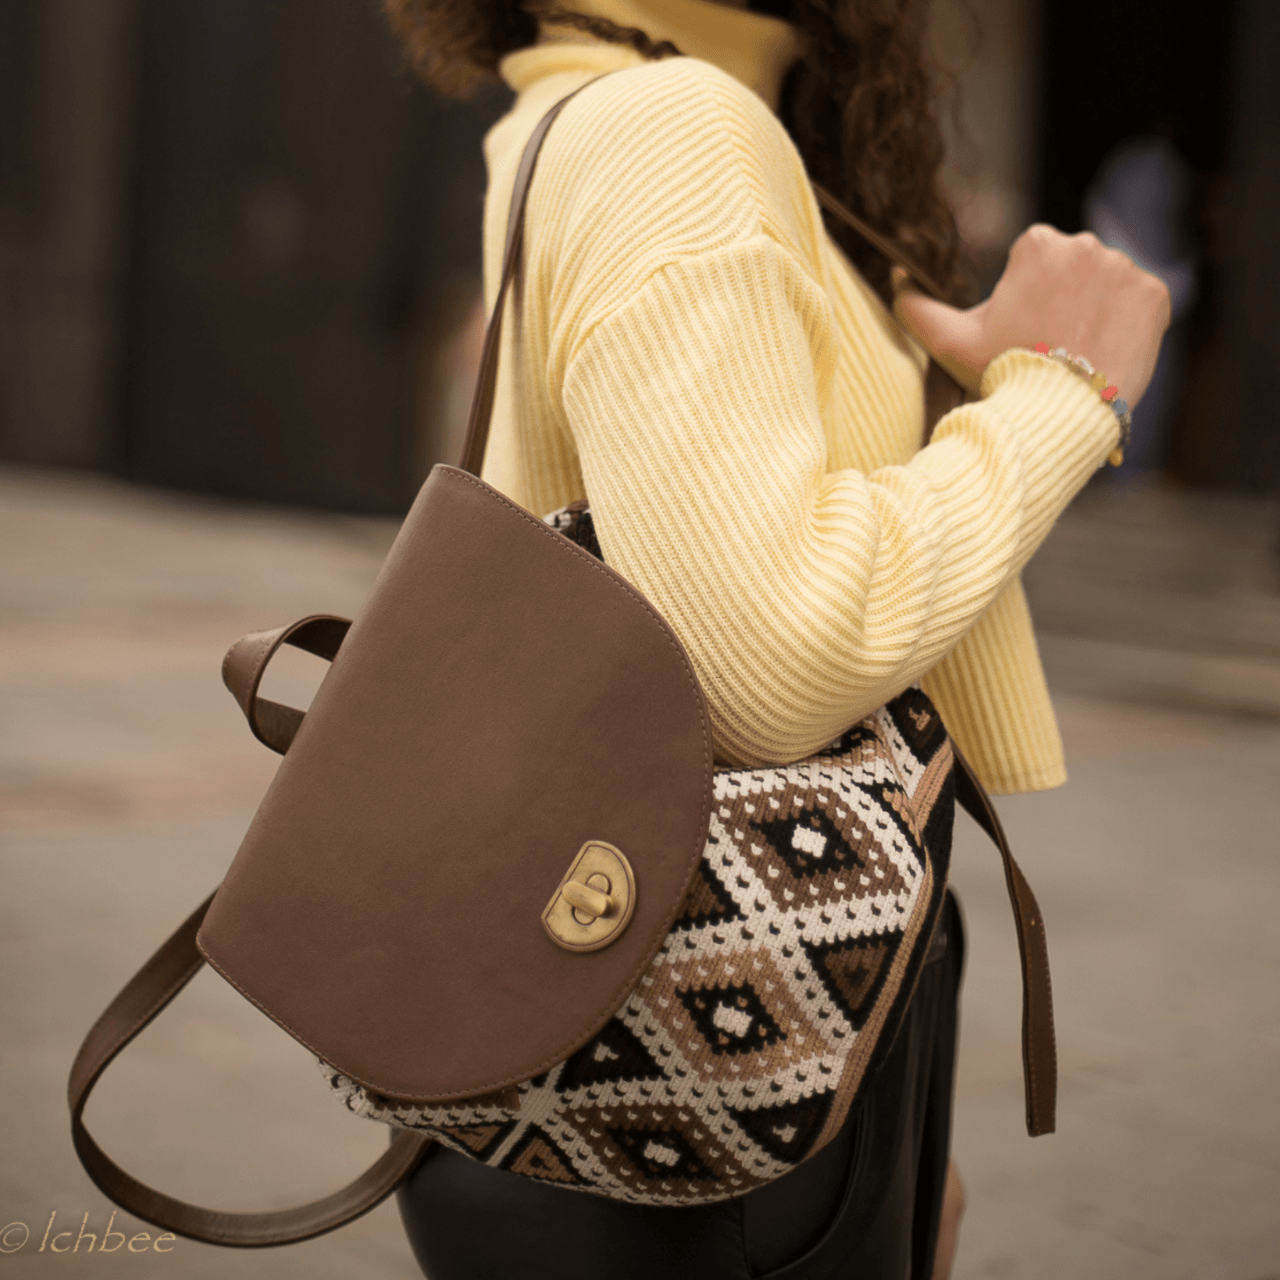 Cienaga backpack showcasing a distinctive Wayuu pattern on the body, accentuated by rich brown genuine leather details. The unique Wayuu designs are presented in an elegant blend of beige, brown, and black shades.